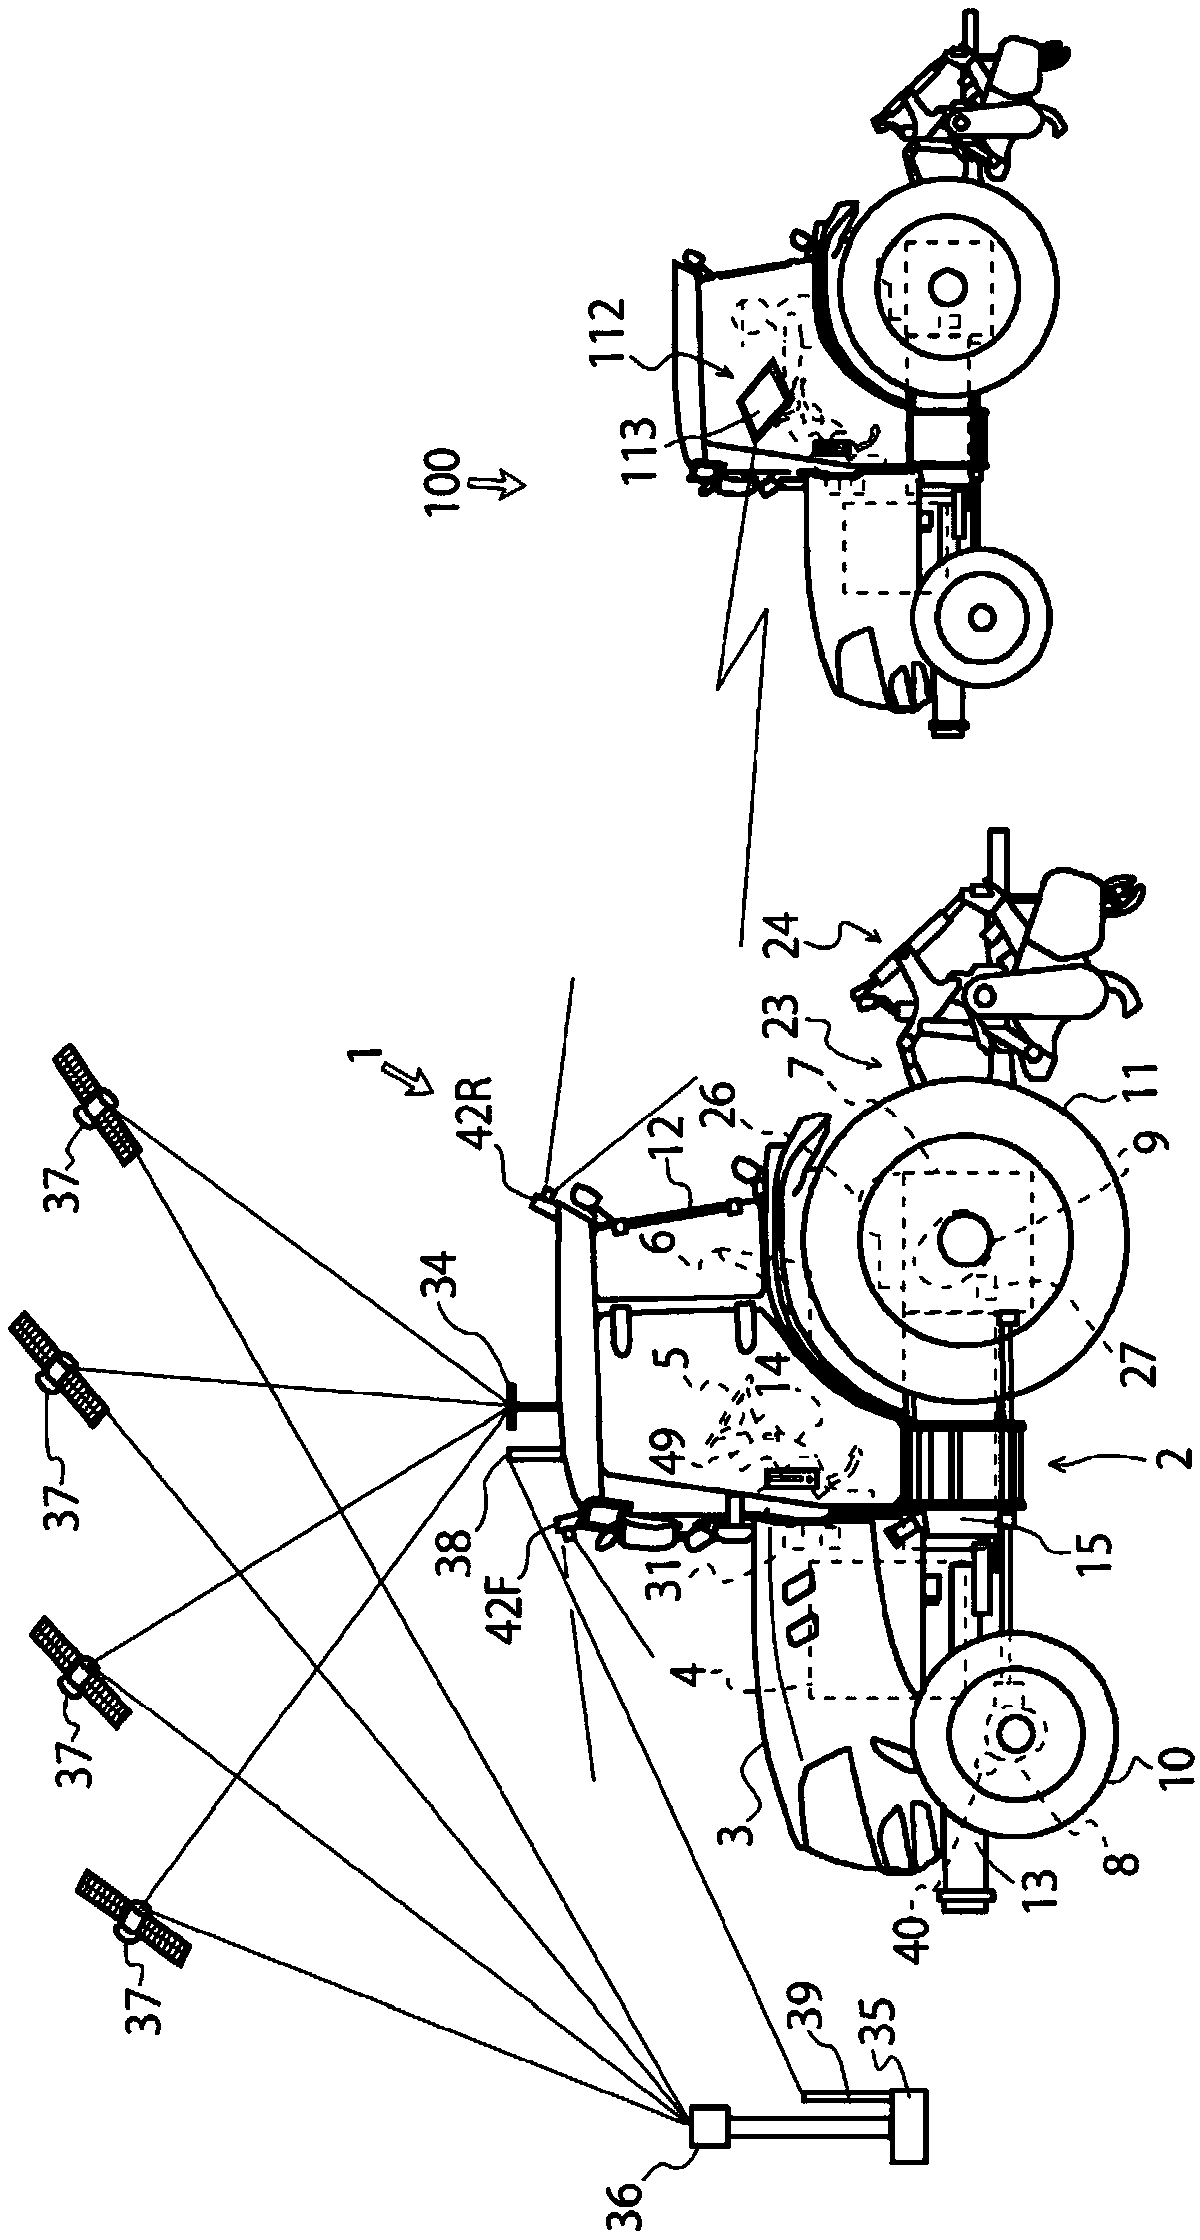 Work vehicle and travel region specification device